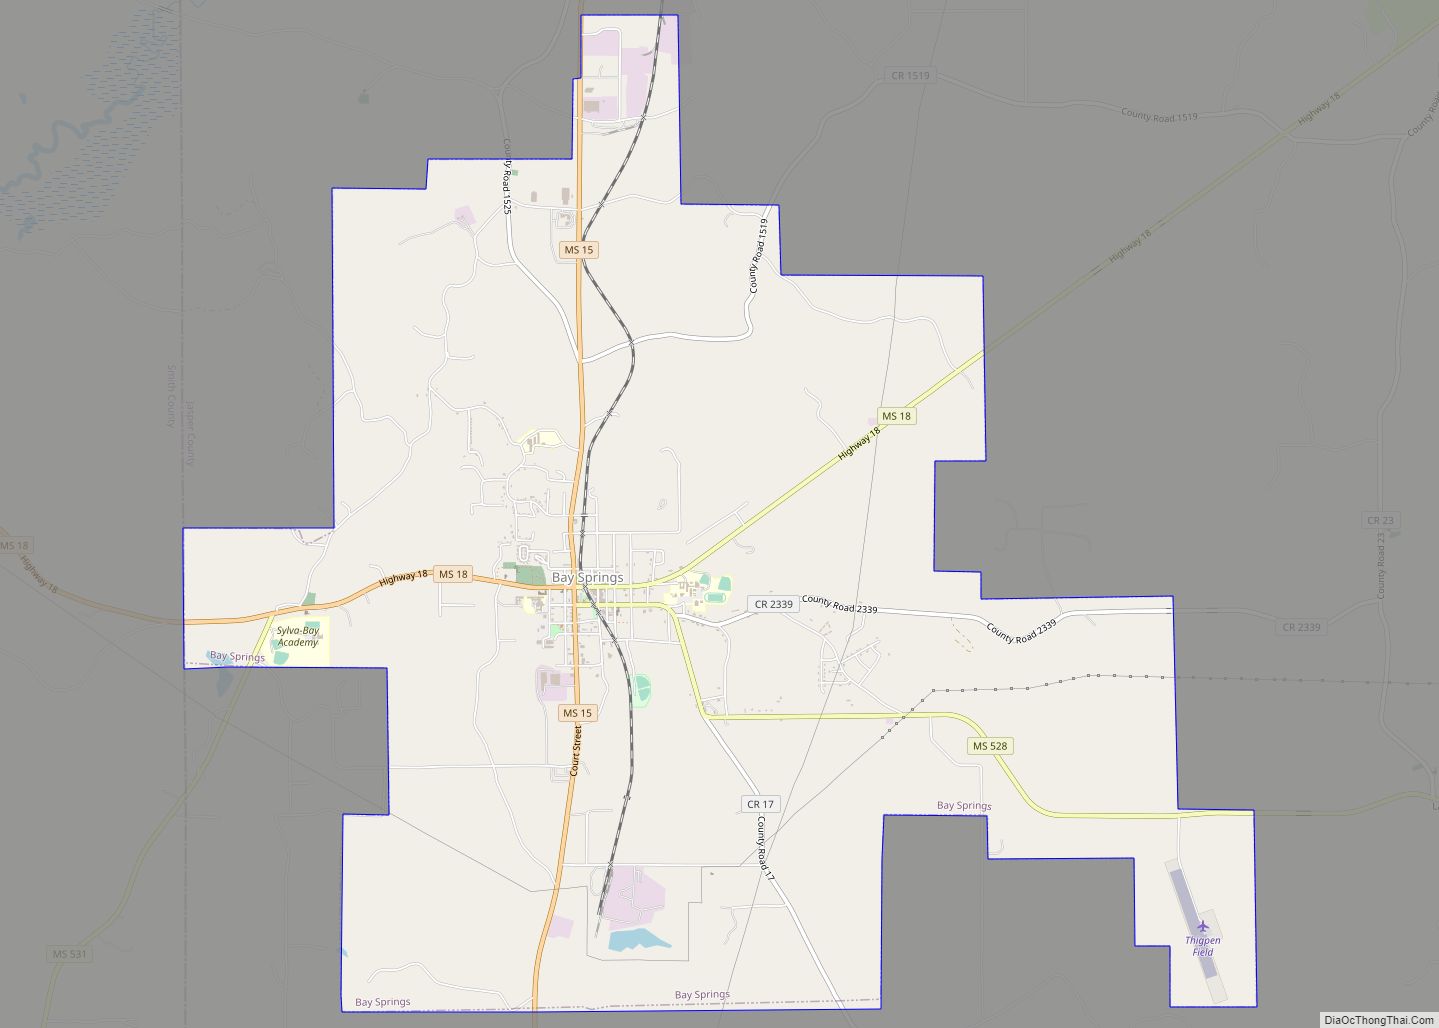 Map of Bay Springs city